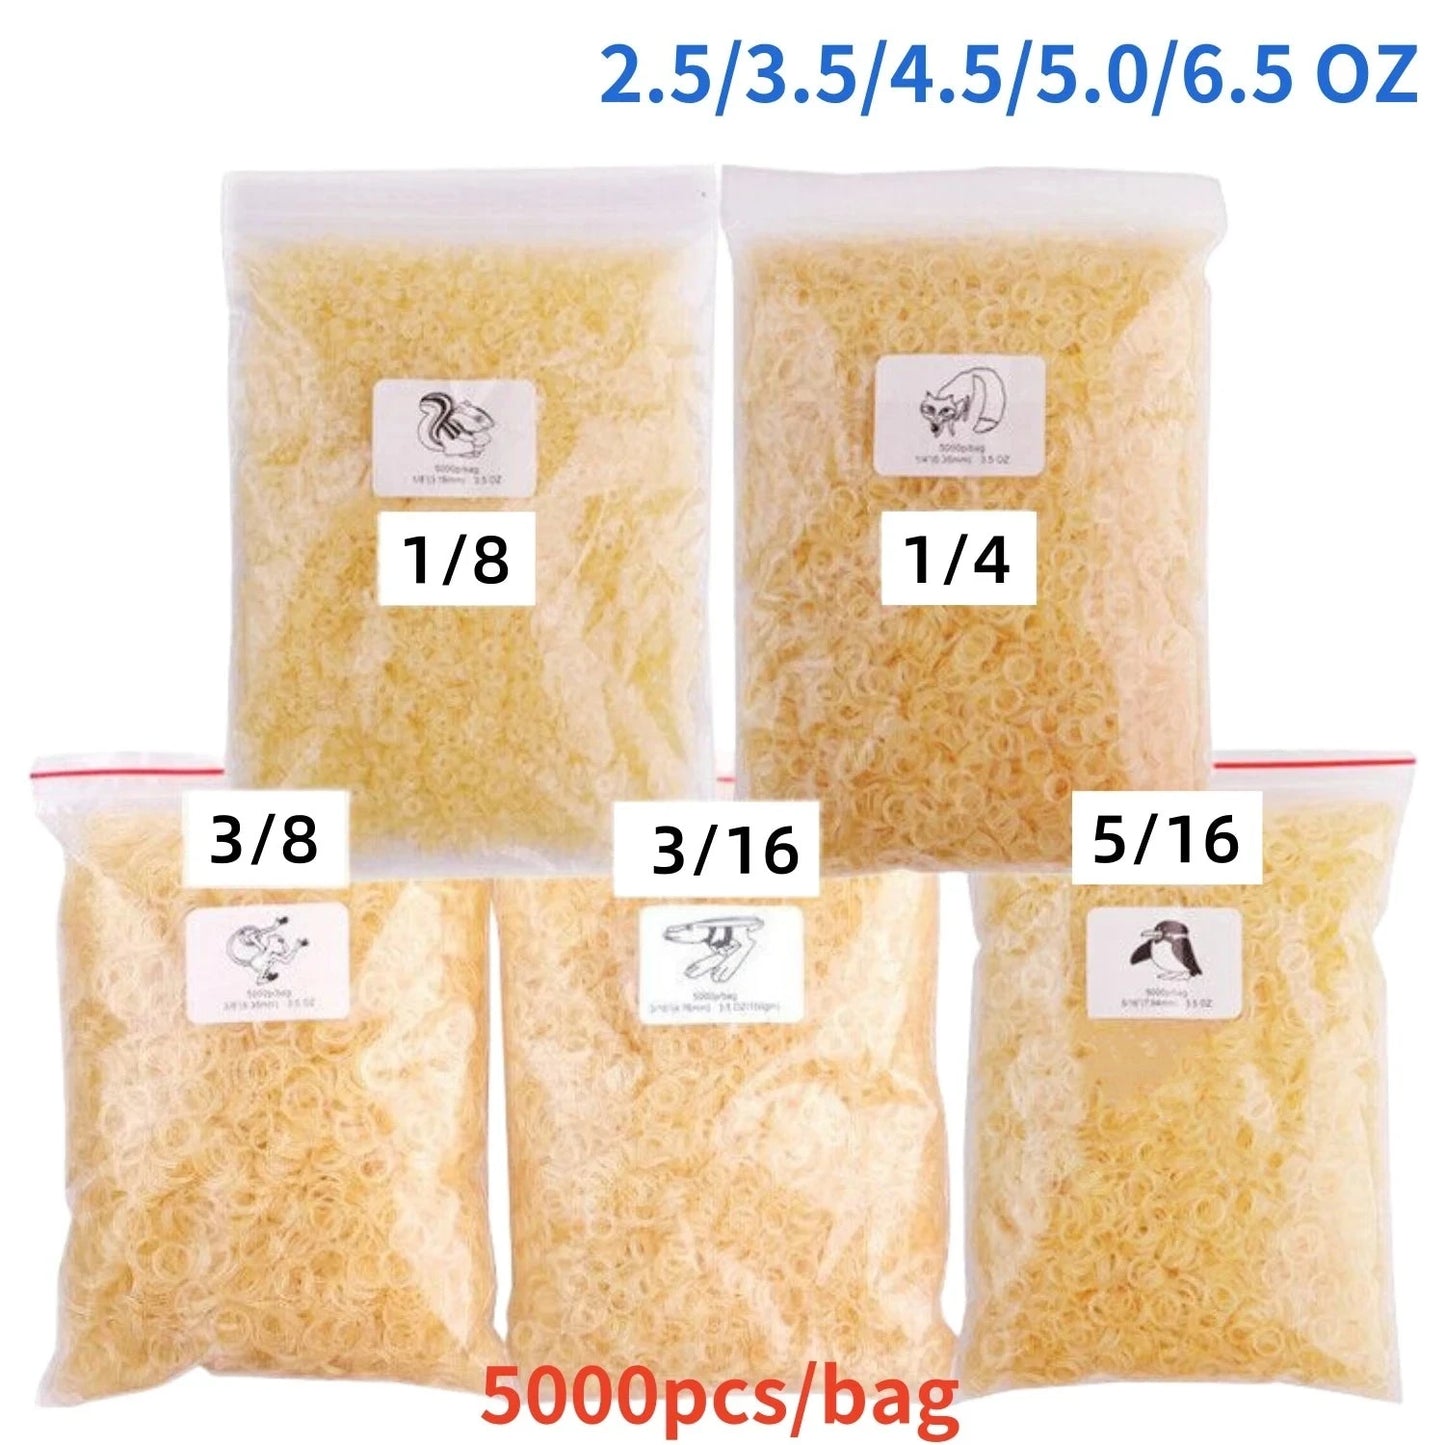 OrthoExtent Orthodontic Intra-Oral Bands - 5000Pcs for Braces